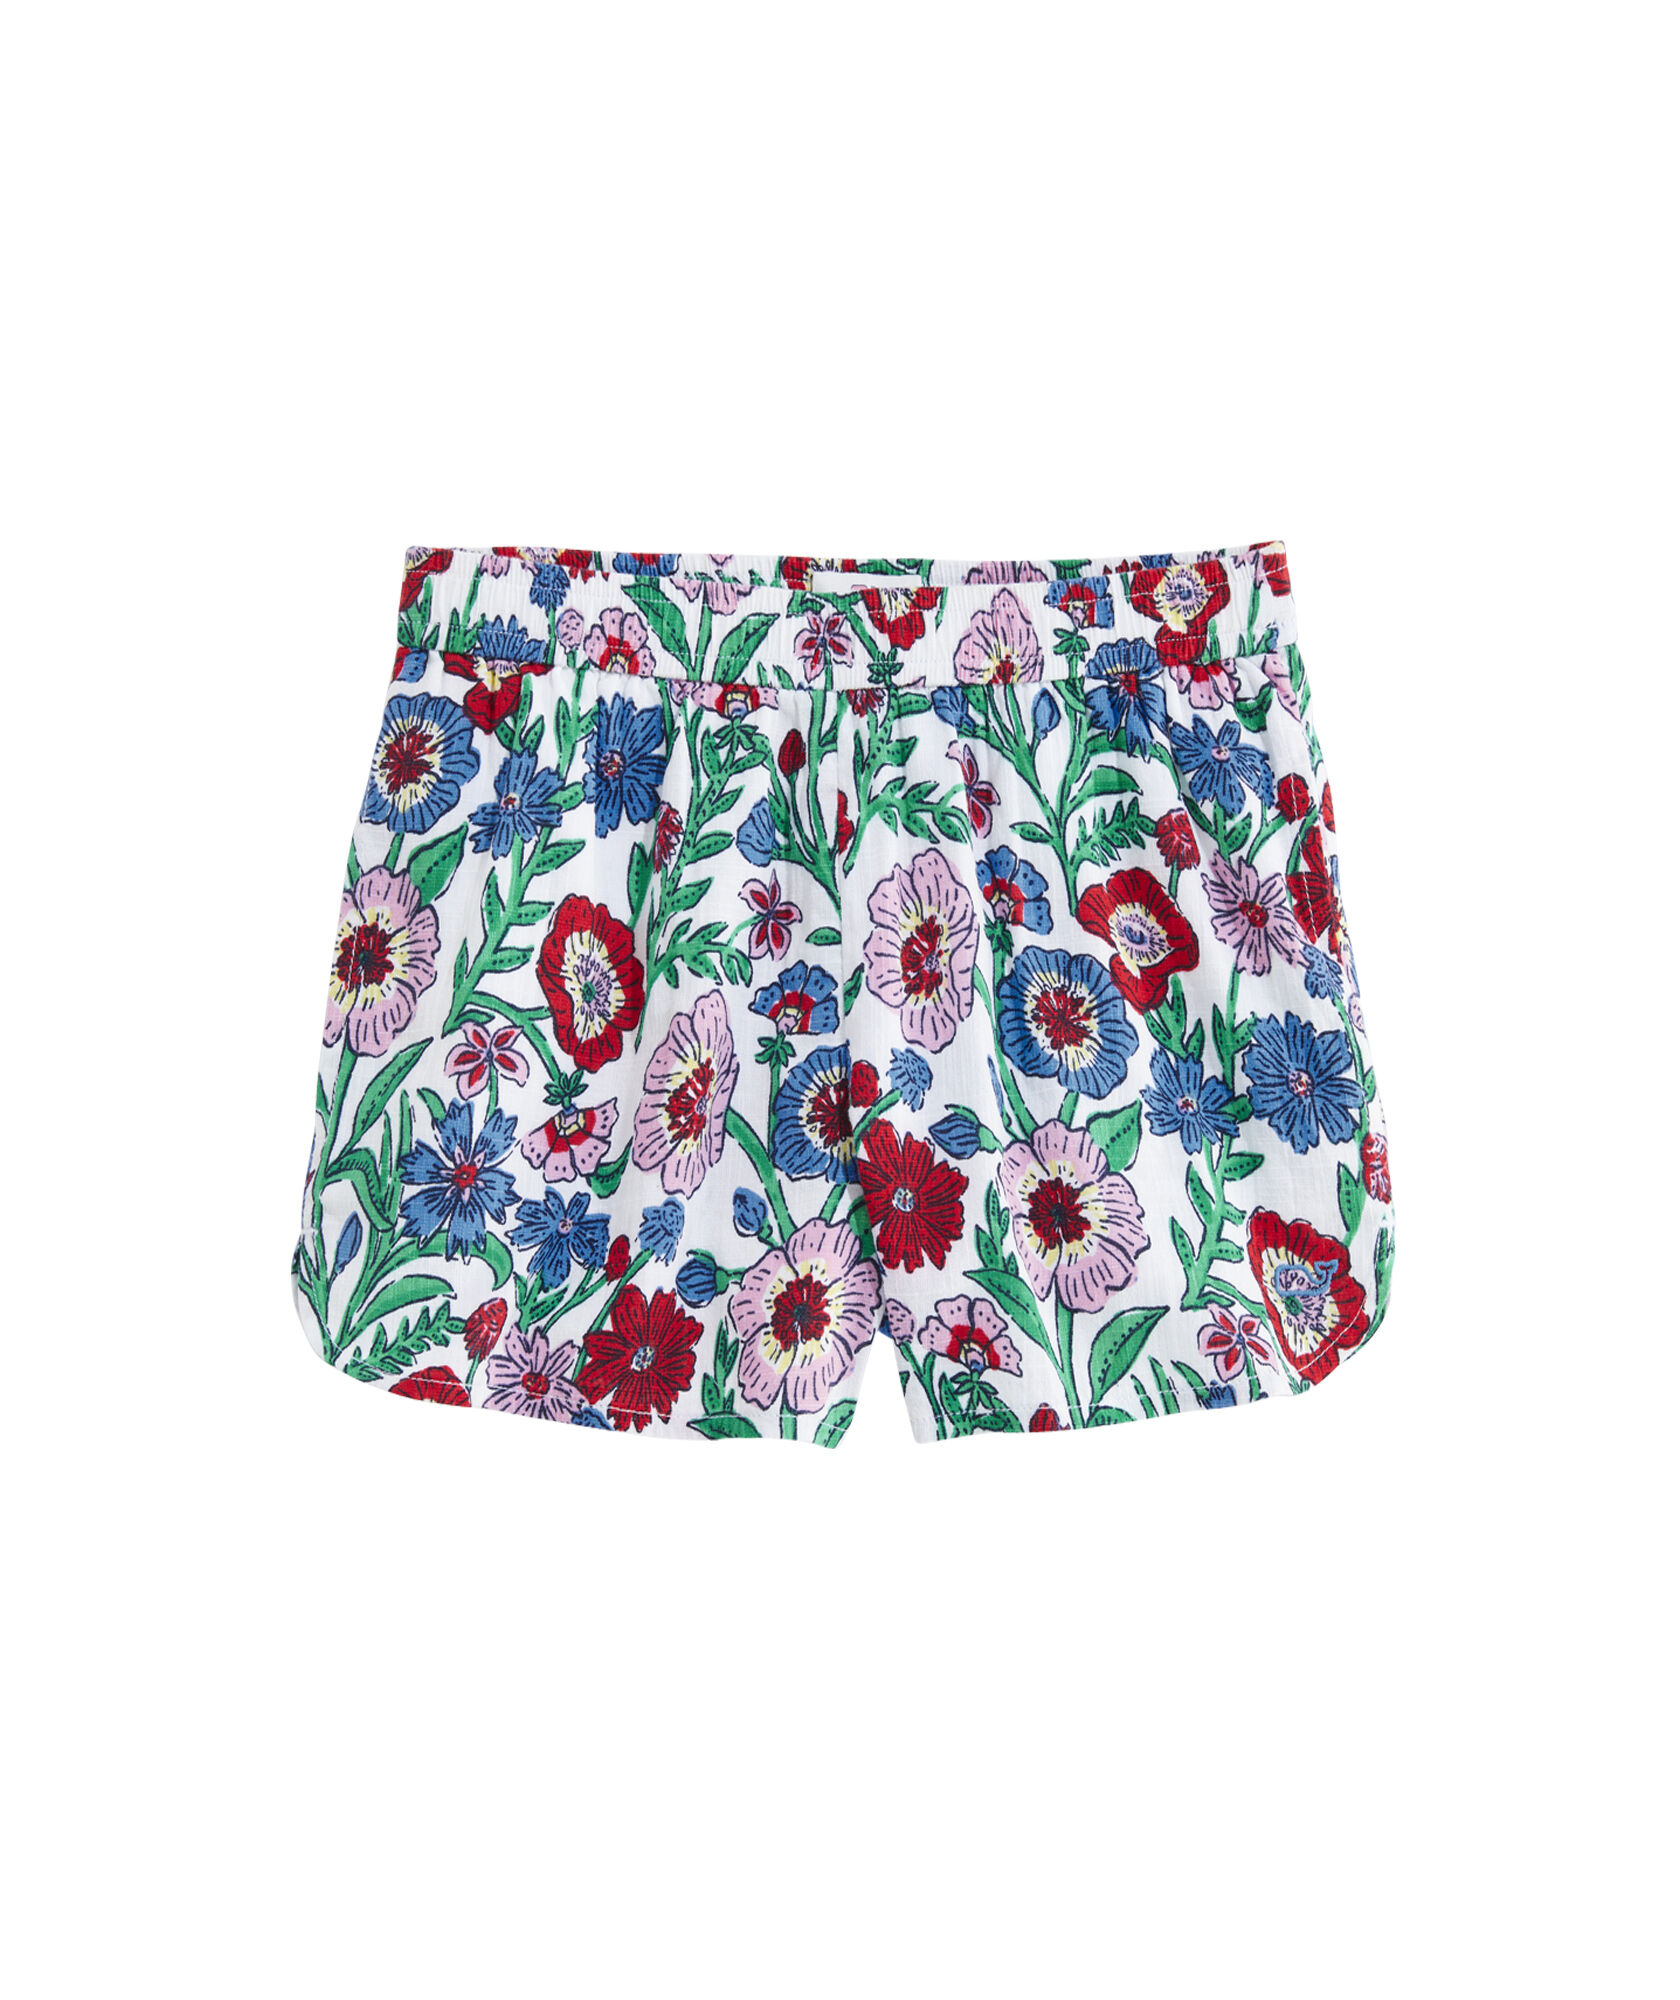 OUTLET Girls' Printed Pull-On Shorts